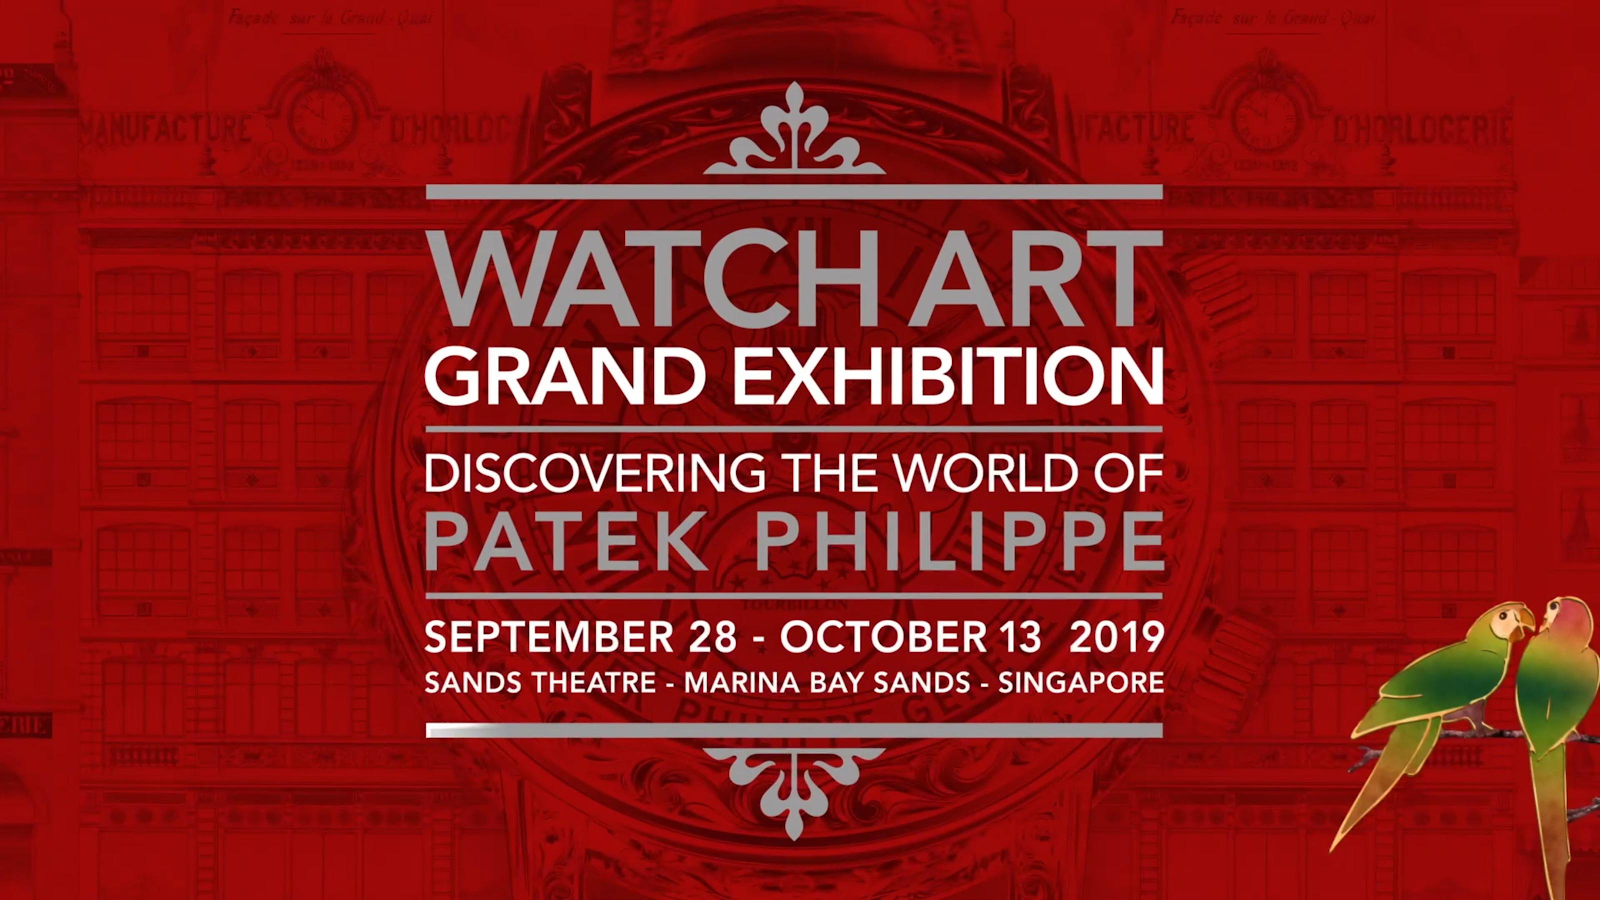 Patek Philippe Watch Art Grand Exhibitions Singapore 2019 at Sands Theatre Marina Bay Sands